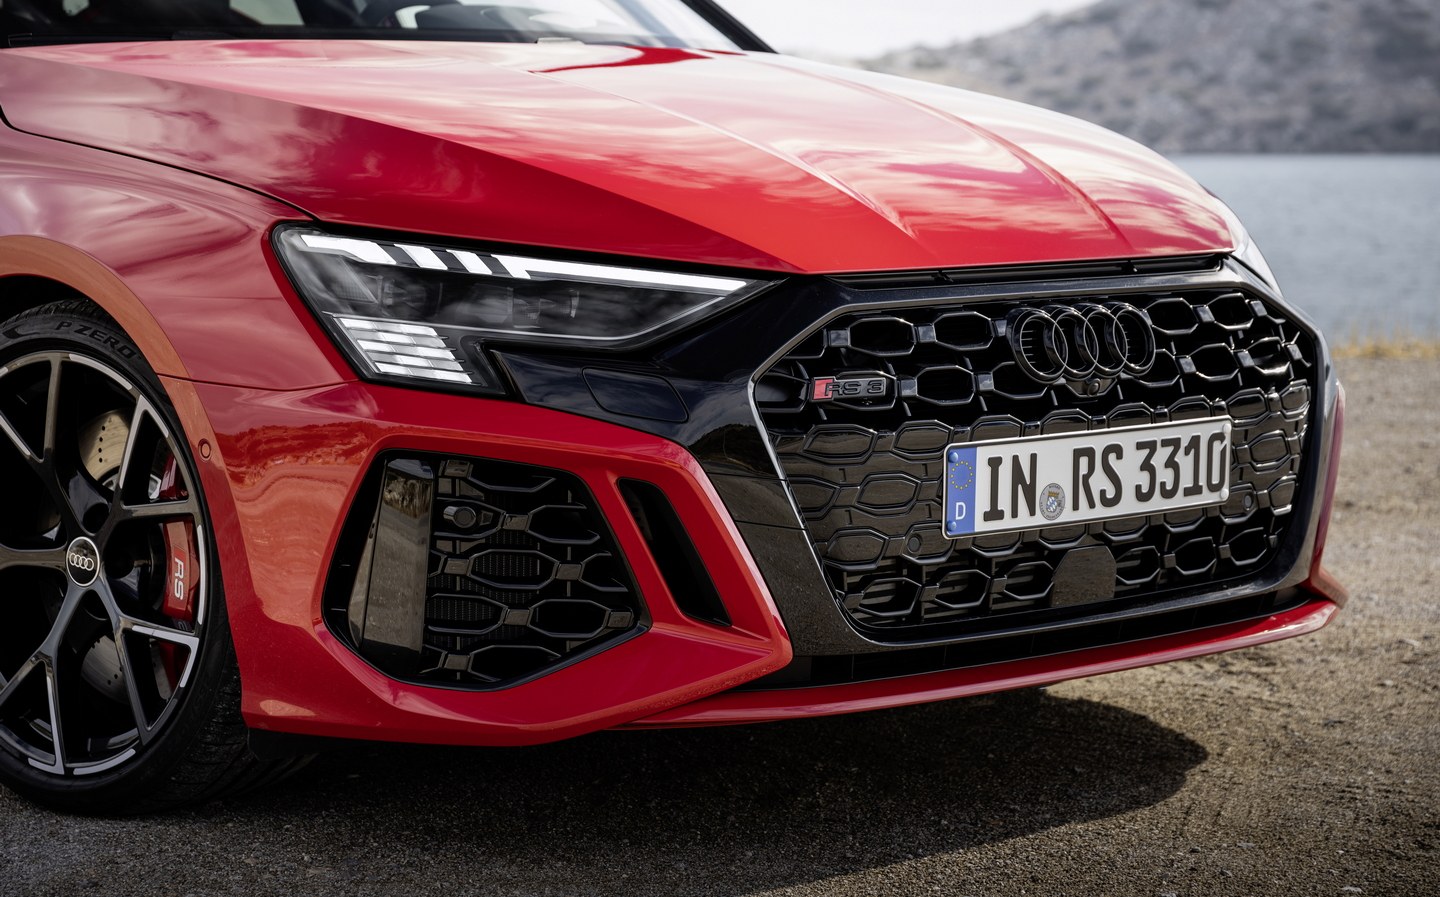 https://www.driving.co.uk/wp-content/uploads/sites/5/2021/11/Audi-RS-3_3049.jpg